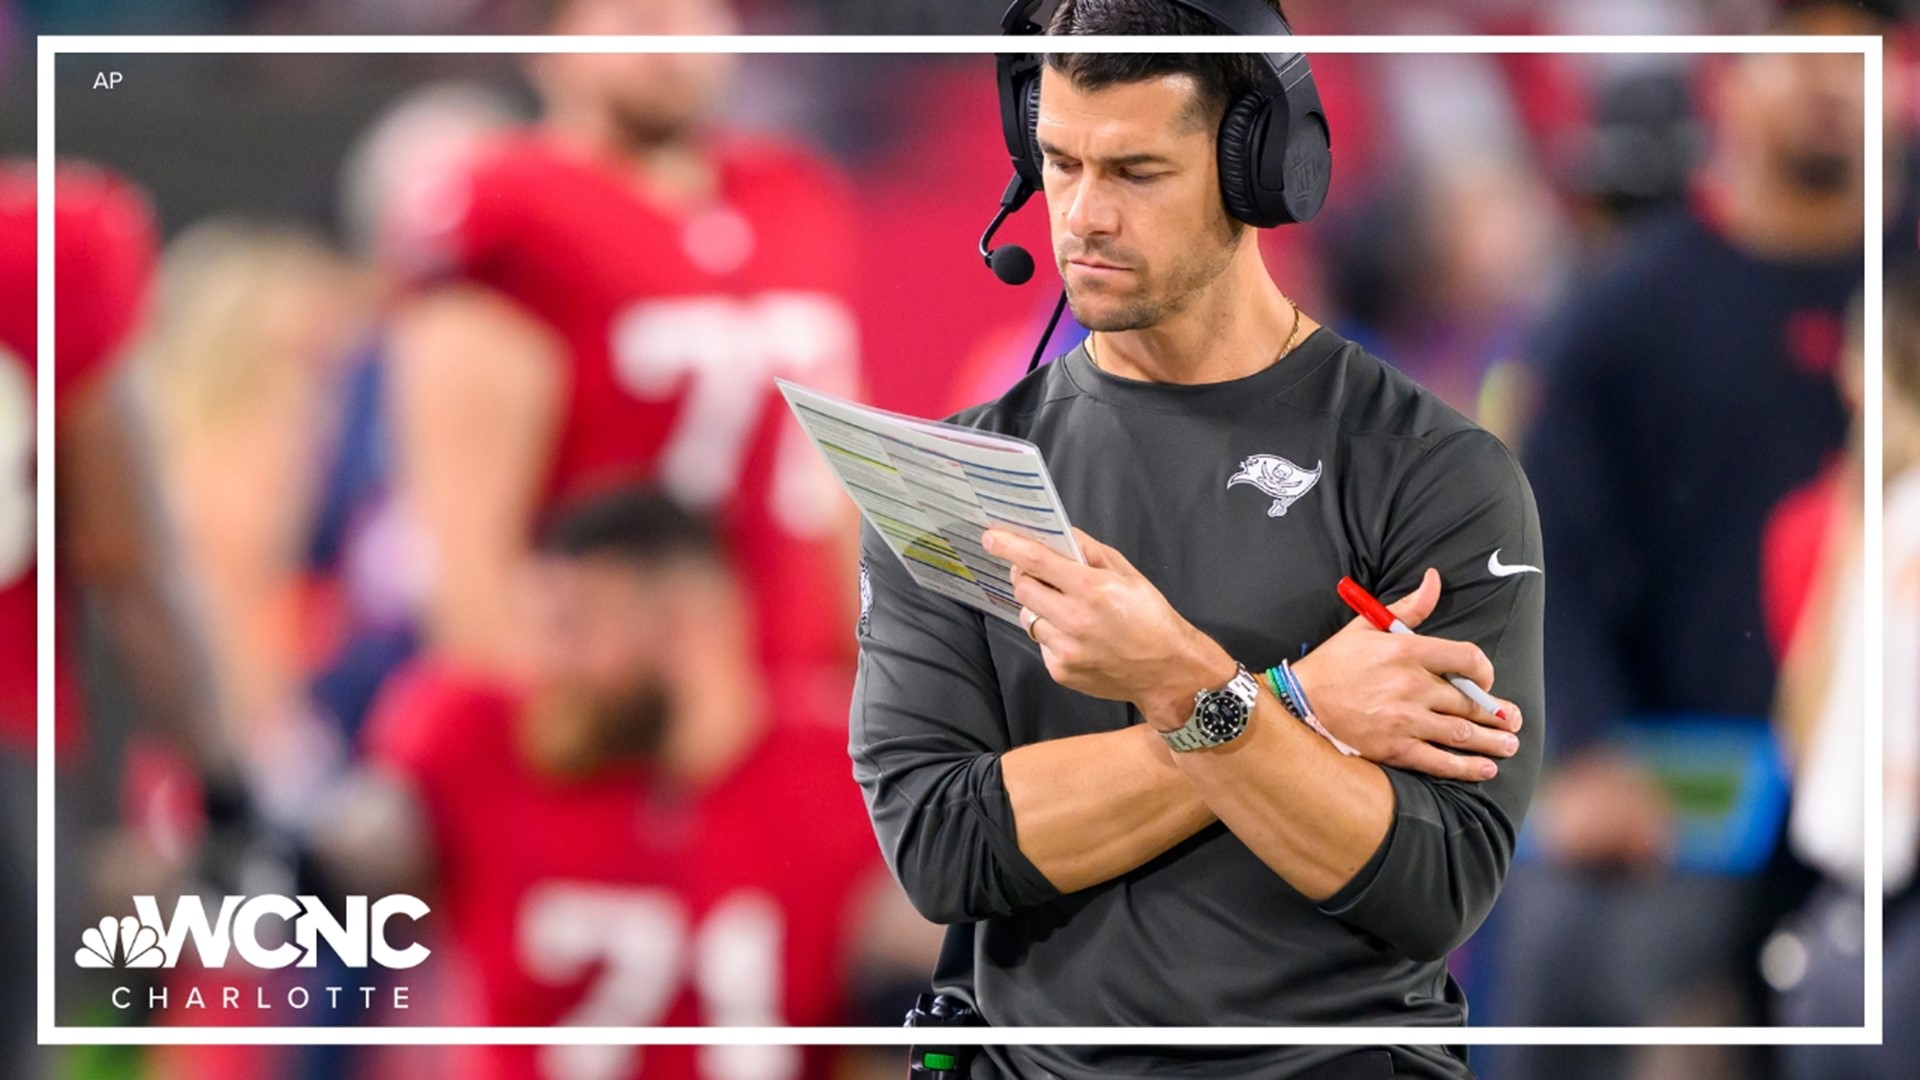 Current offensive coordinator for the Tampa Bay Buccaneers will reportedly be the next head coach of the Carolina Panthers.